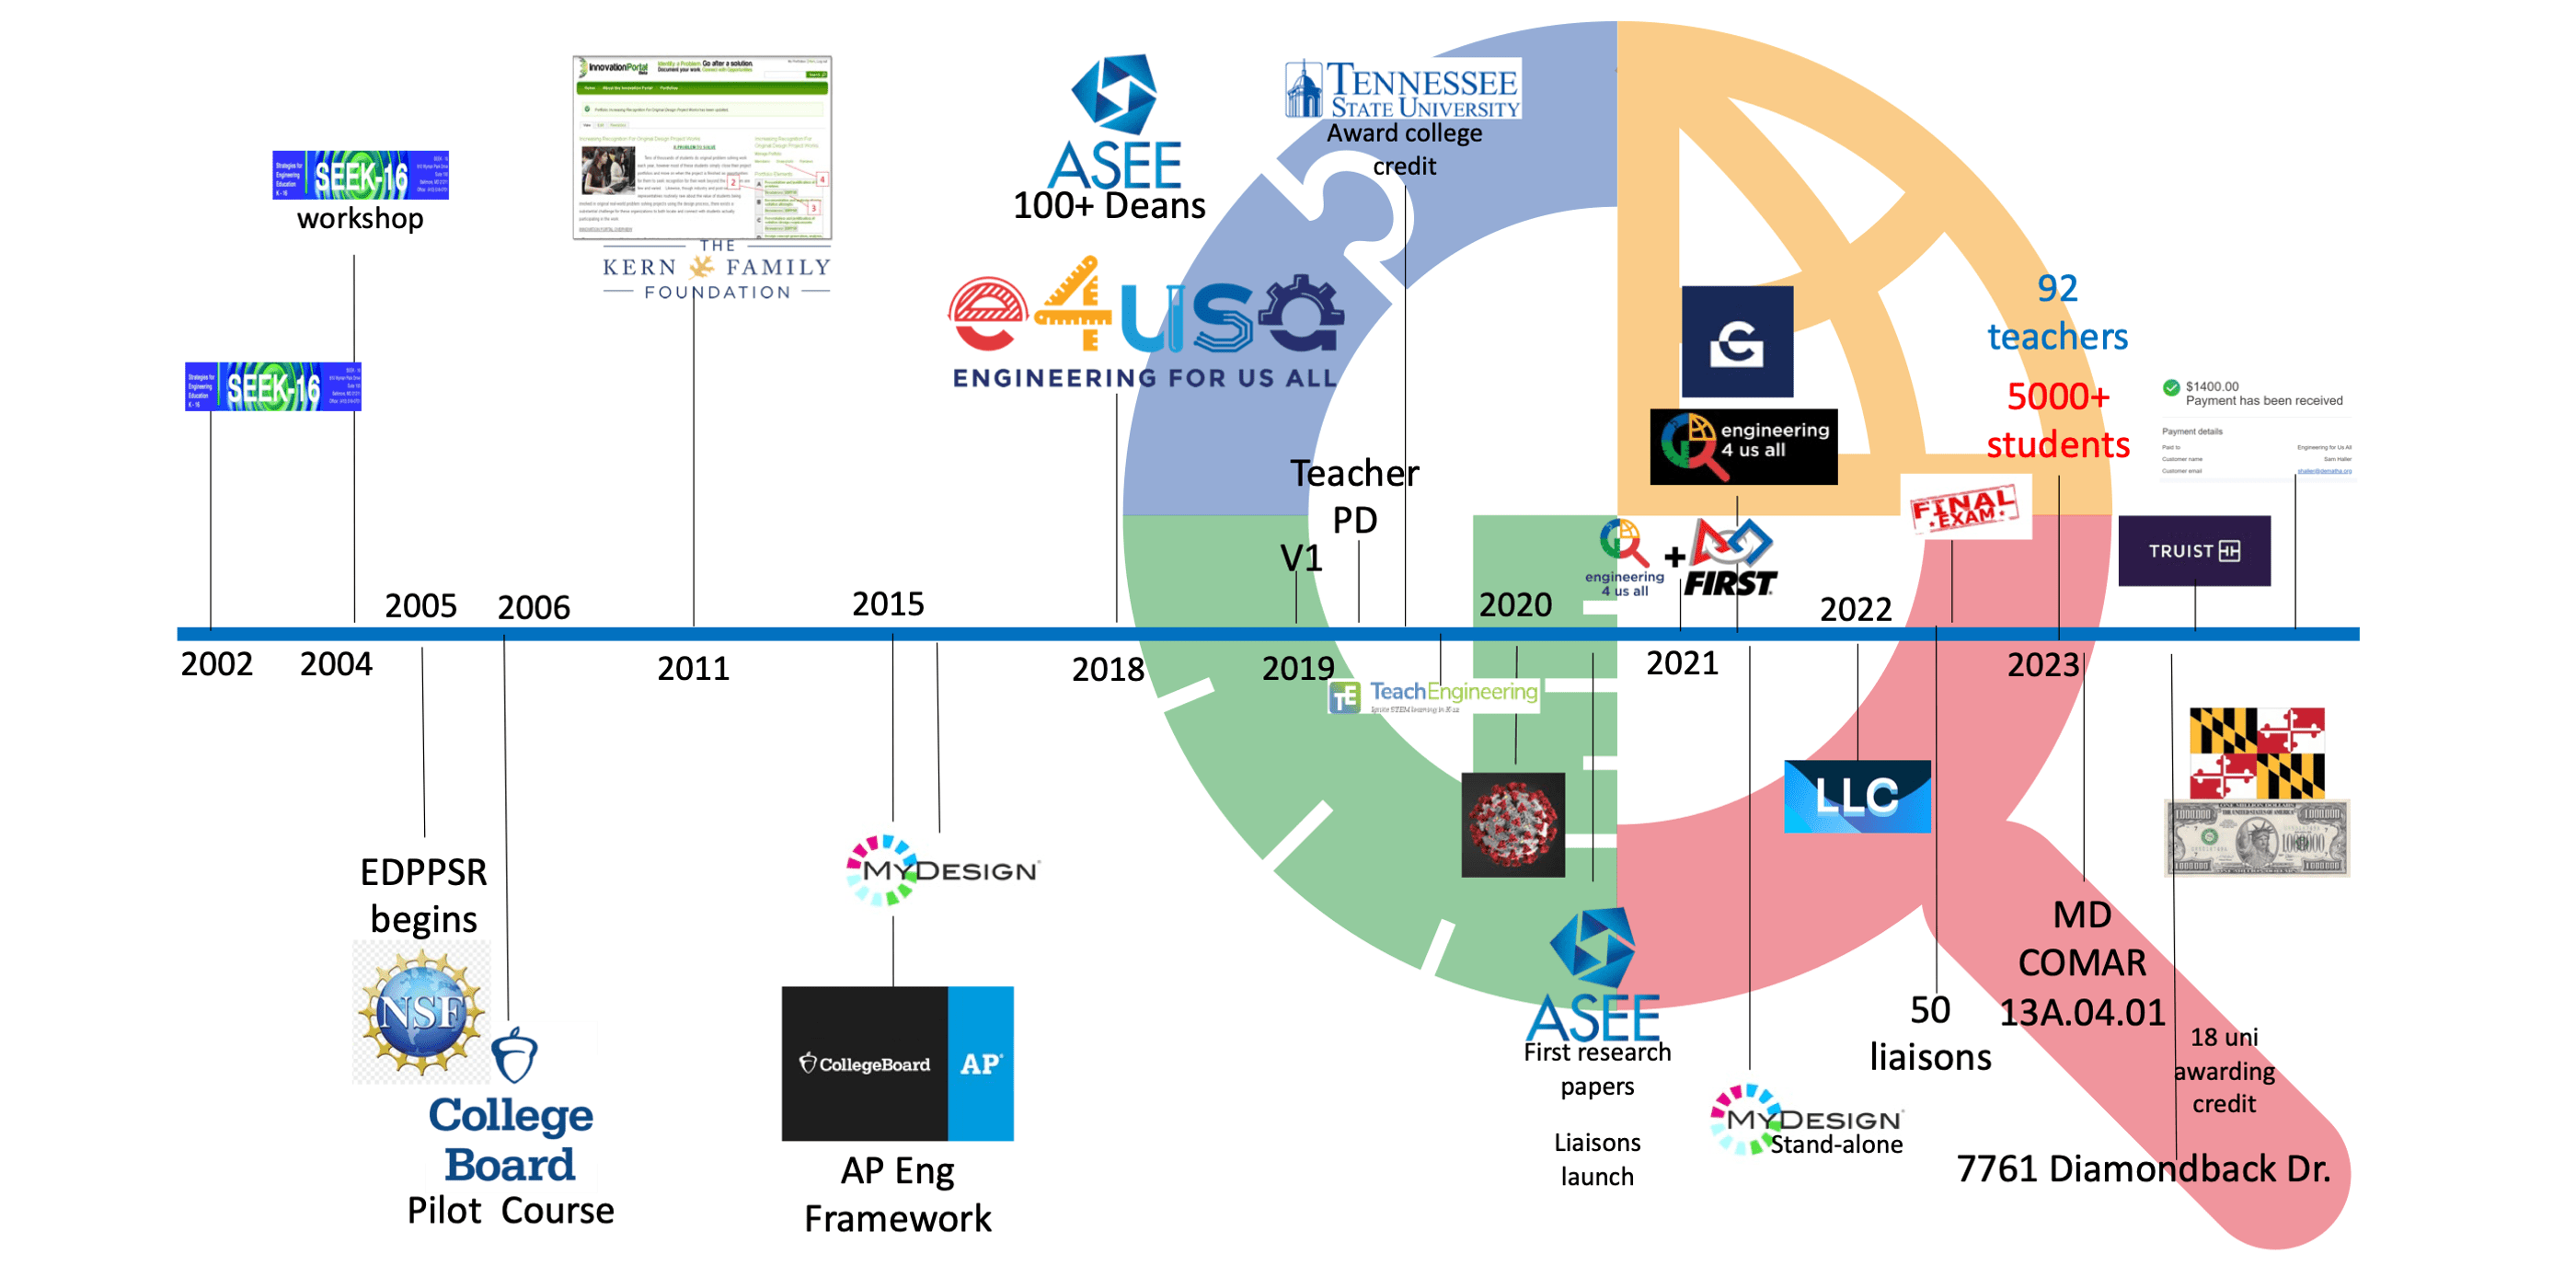 e4usa timeline of events through the years